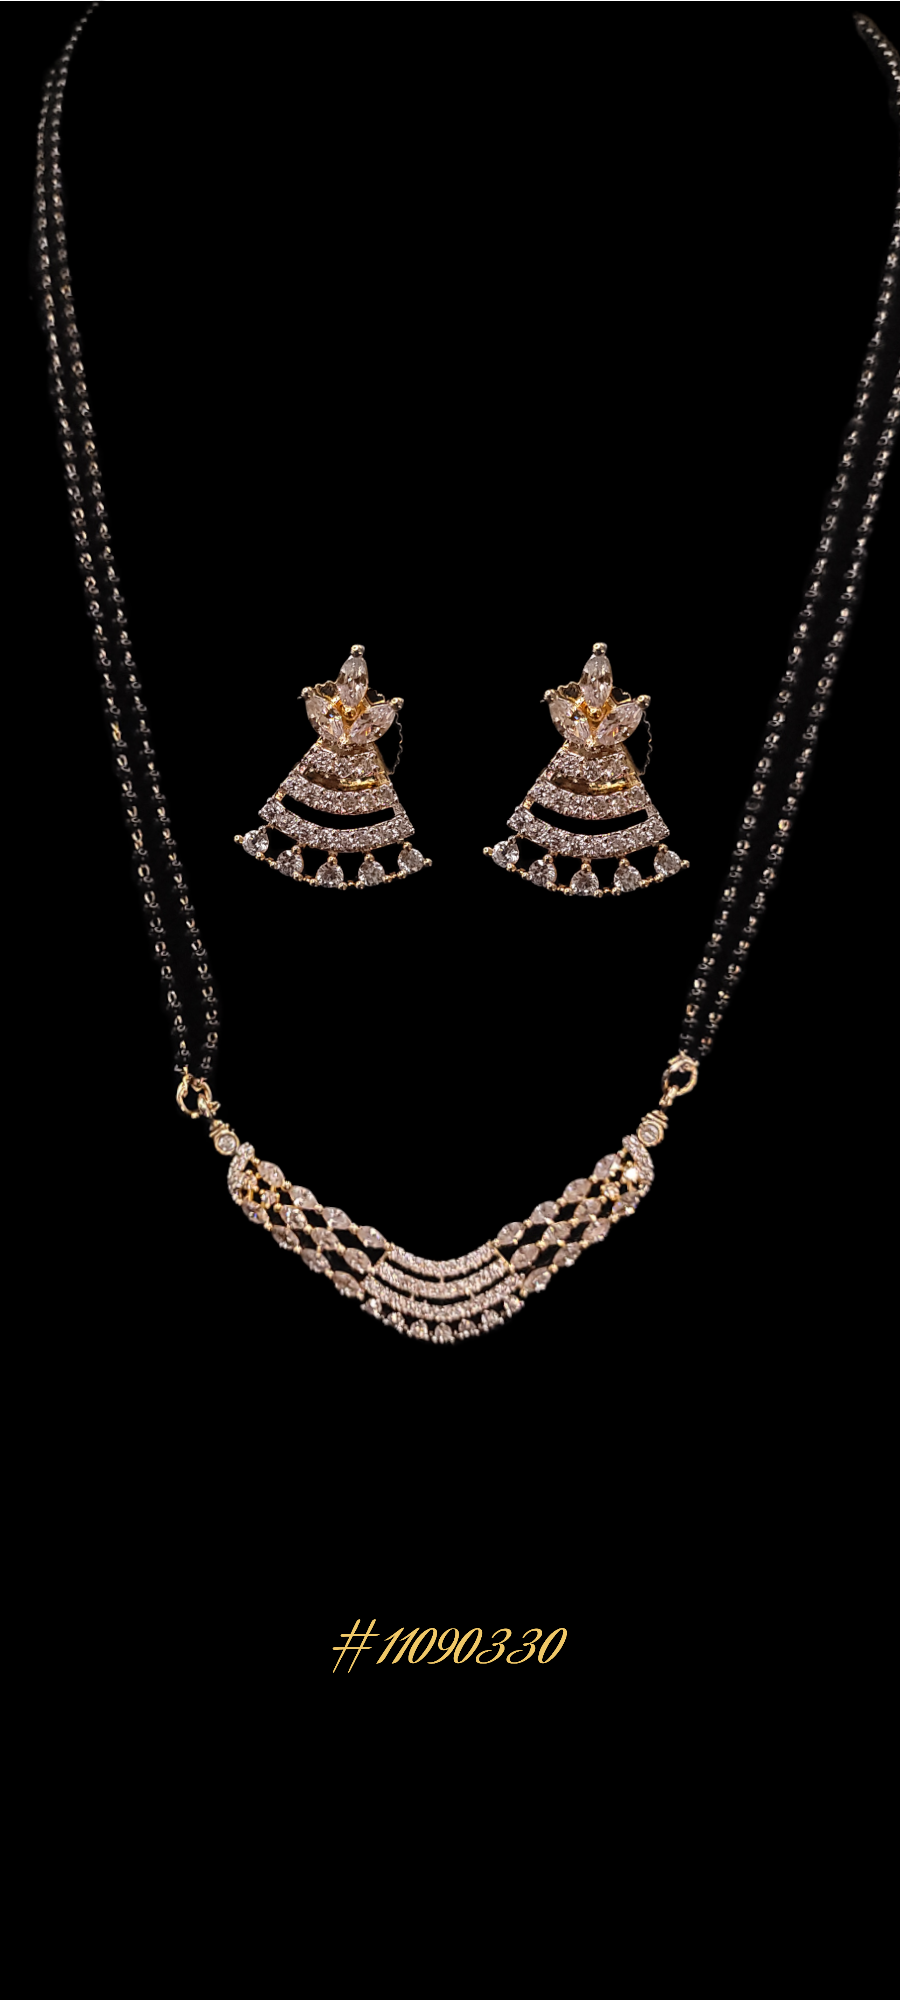 MANGALSUTRA SETS IN GOLD COLOR WITH DIAMONDS